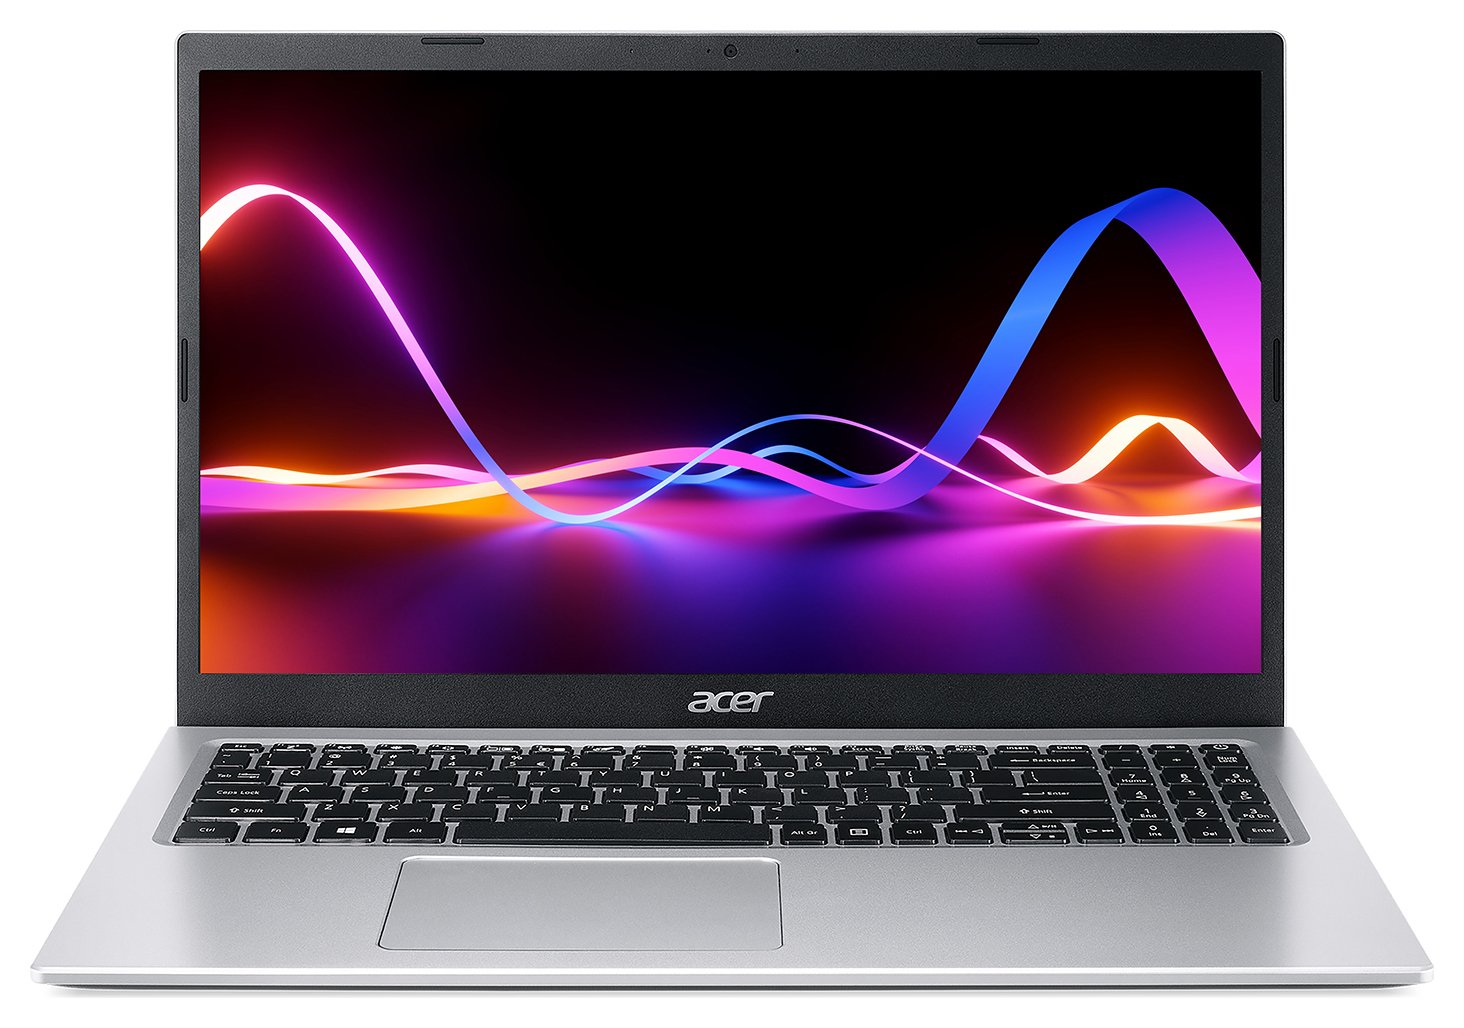 Acer Aspire 3 15.6in i7 8GB 1TB FHD Laptop - Silver